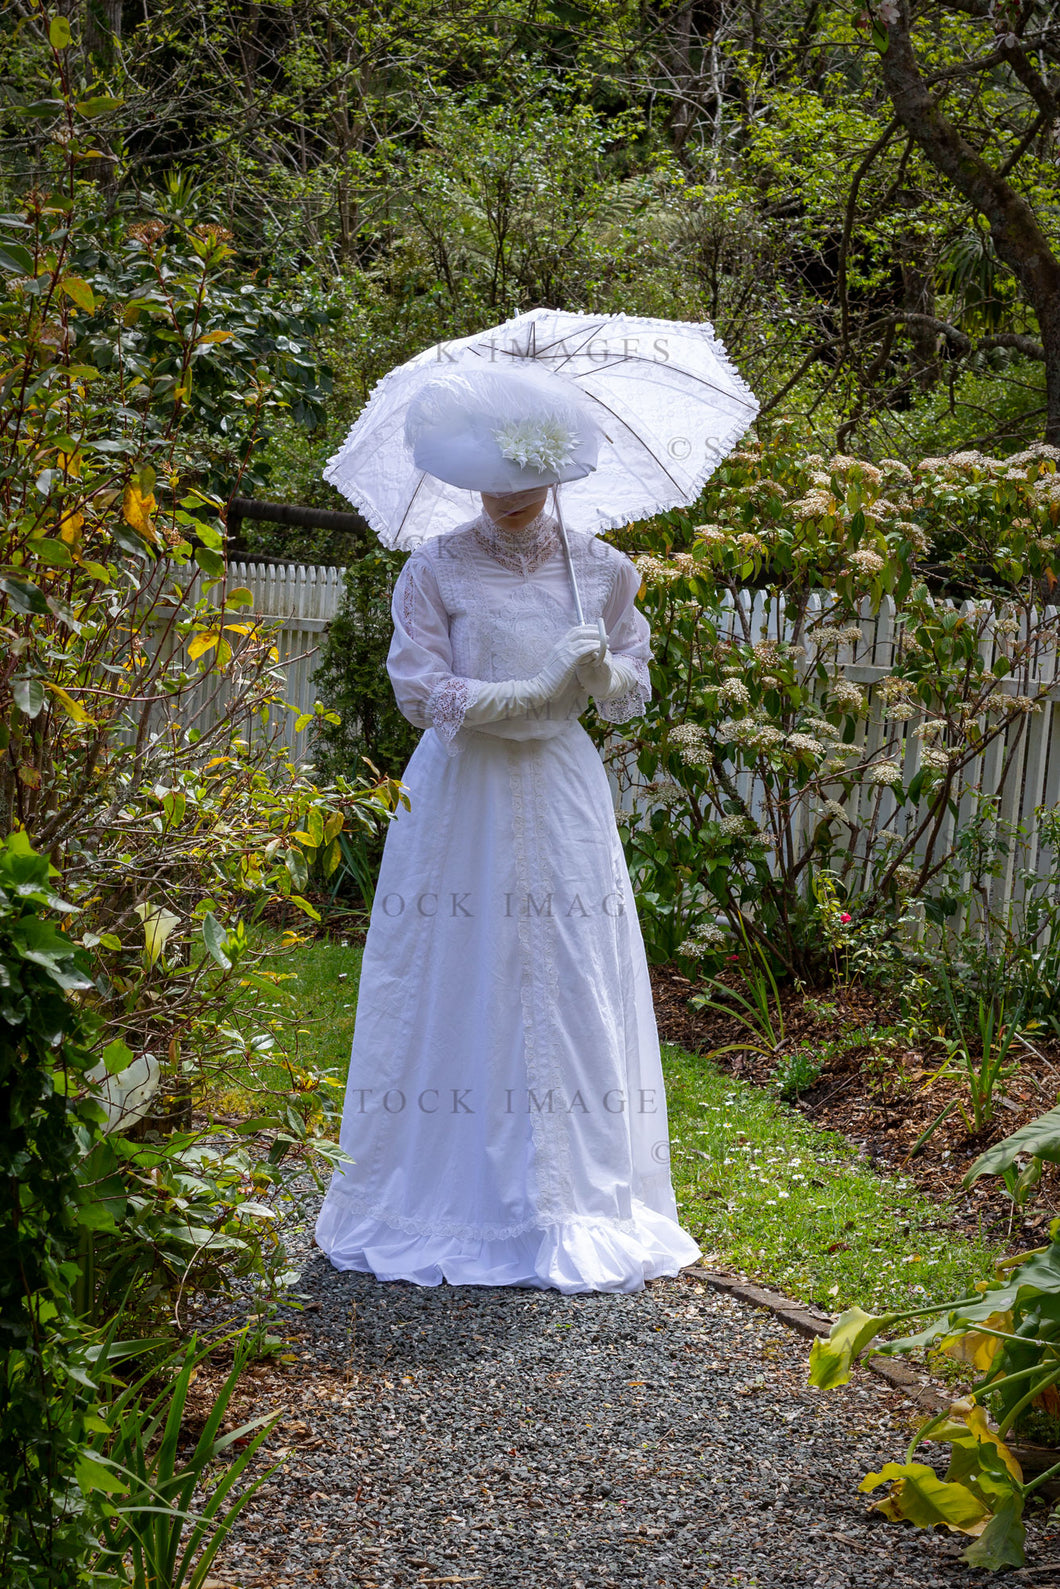 Edwardian woman in a white lace blouse and skirt and walking in a garden (Tayla 0233)